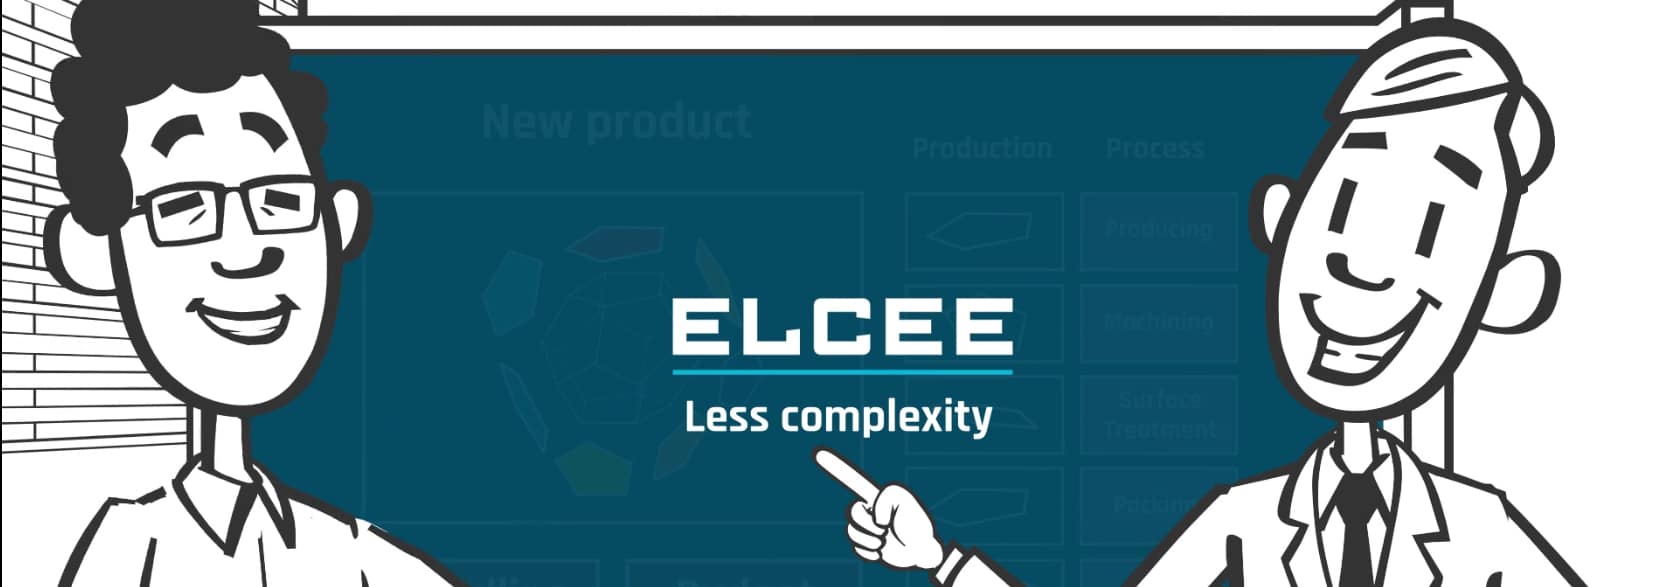 ELCEE your advantages